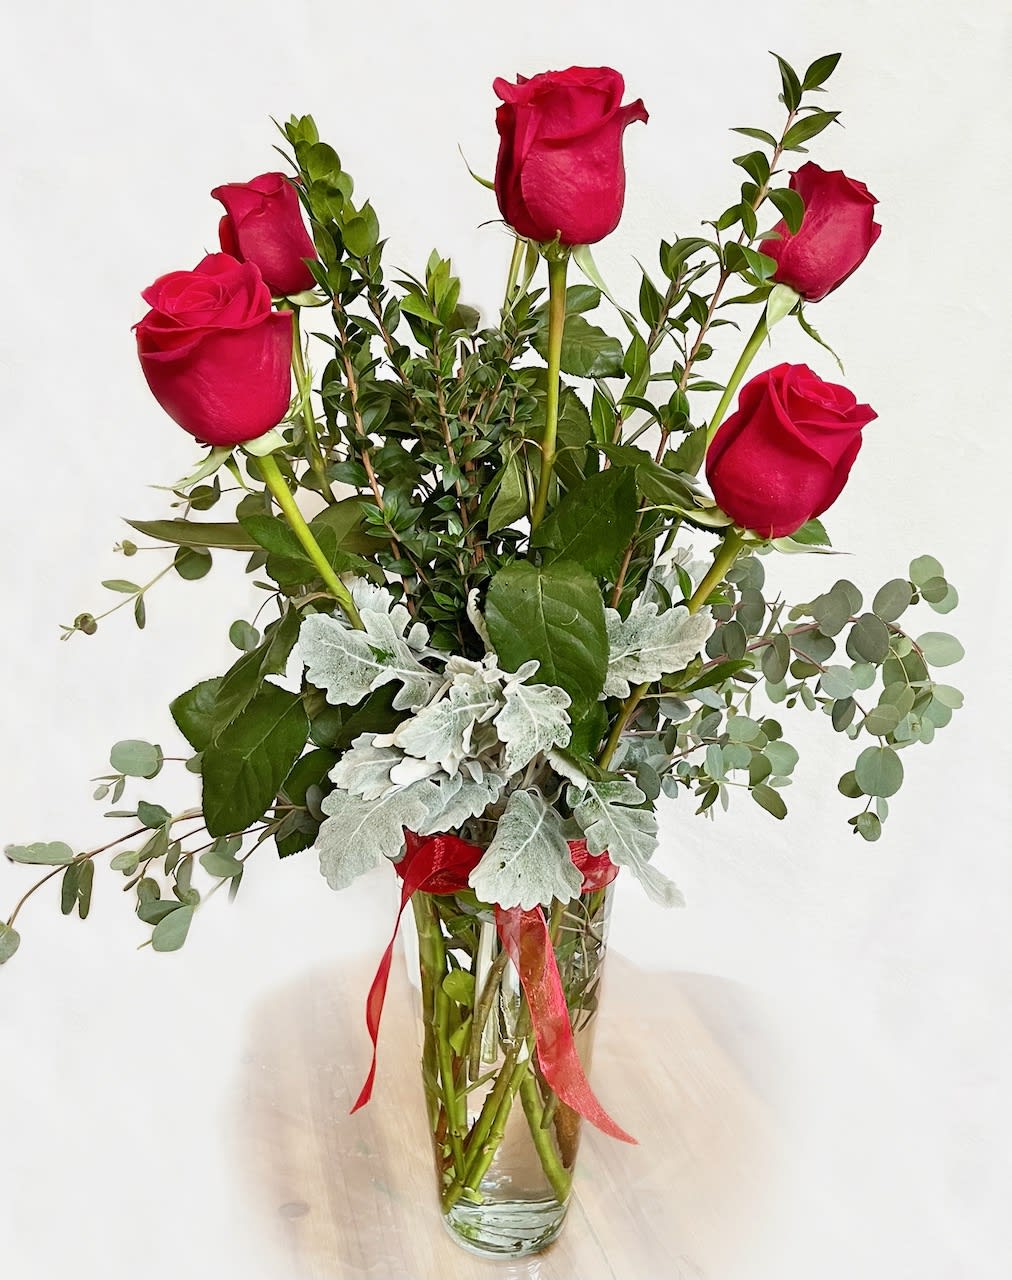 Six Red Roses in a Vase - Half a dozen beautiful red roses come arranged in a tall vase.